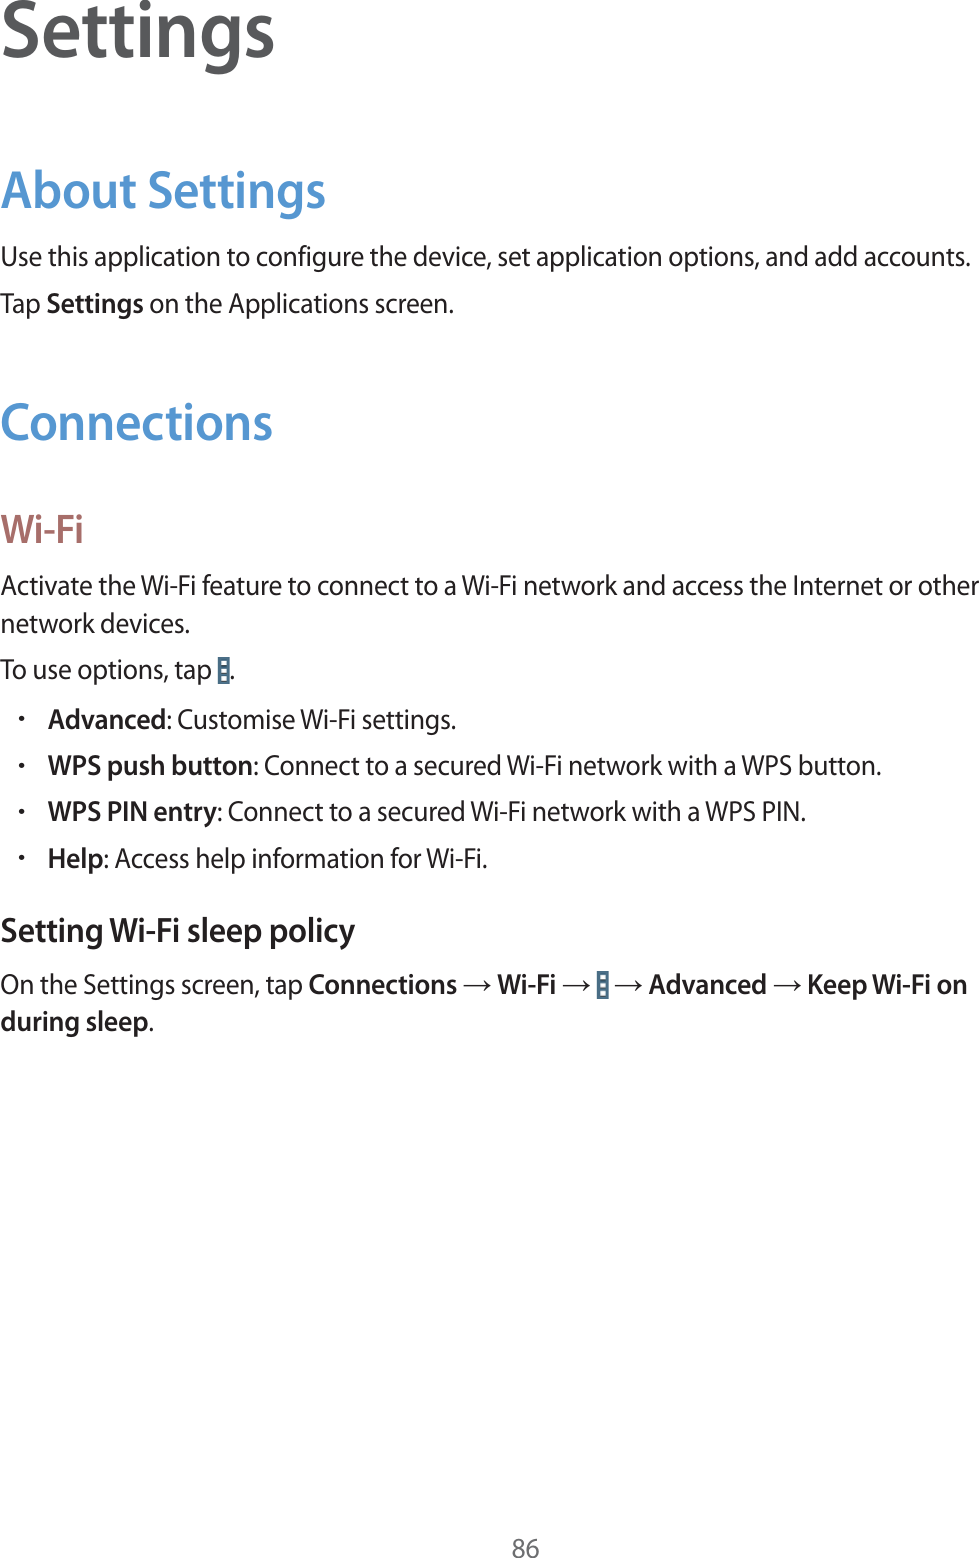 86SettingsAbout SettingsUse this application to configure the device, set application options, and add accounts.Tap Settings on the Applications screen.ConnectionsWi-FiActivate the Wi-Fi feature to connect to a Wi-Fi network and access the Internet or other network devices.To use options, tap  .rAdvanced: Customise Wi-Fi settings.rWPS push button: Connect to a secured Wi-Fi network with a WPS button.rWPS PIN entry: Connect to a secured Wi-Fi network with a WPS PIN.rHelp: Access help information for Wi-Fi.Setting Wi-Fi sleep policyOn the Settings screen, tap Connections ĺ Wi-Fi ĺ   ĺ Advanced ĺ Keep Wi-Fi on during sleep.